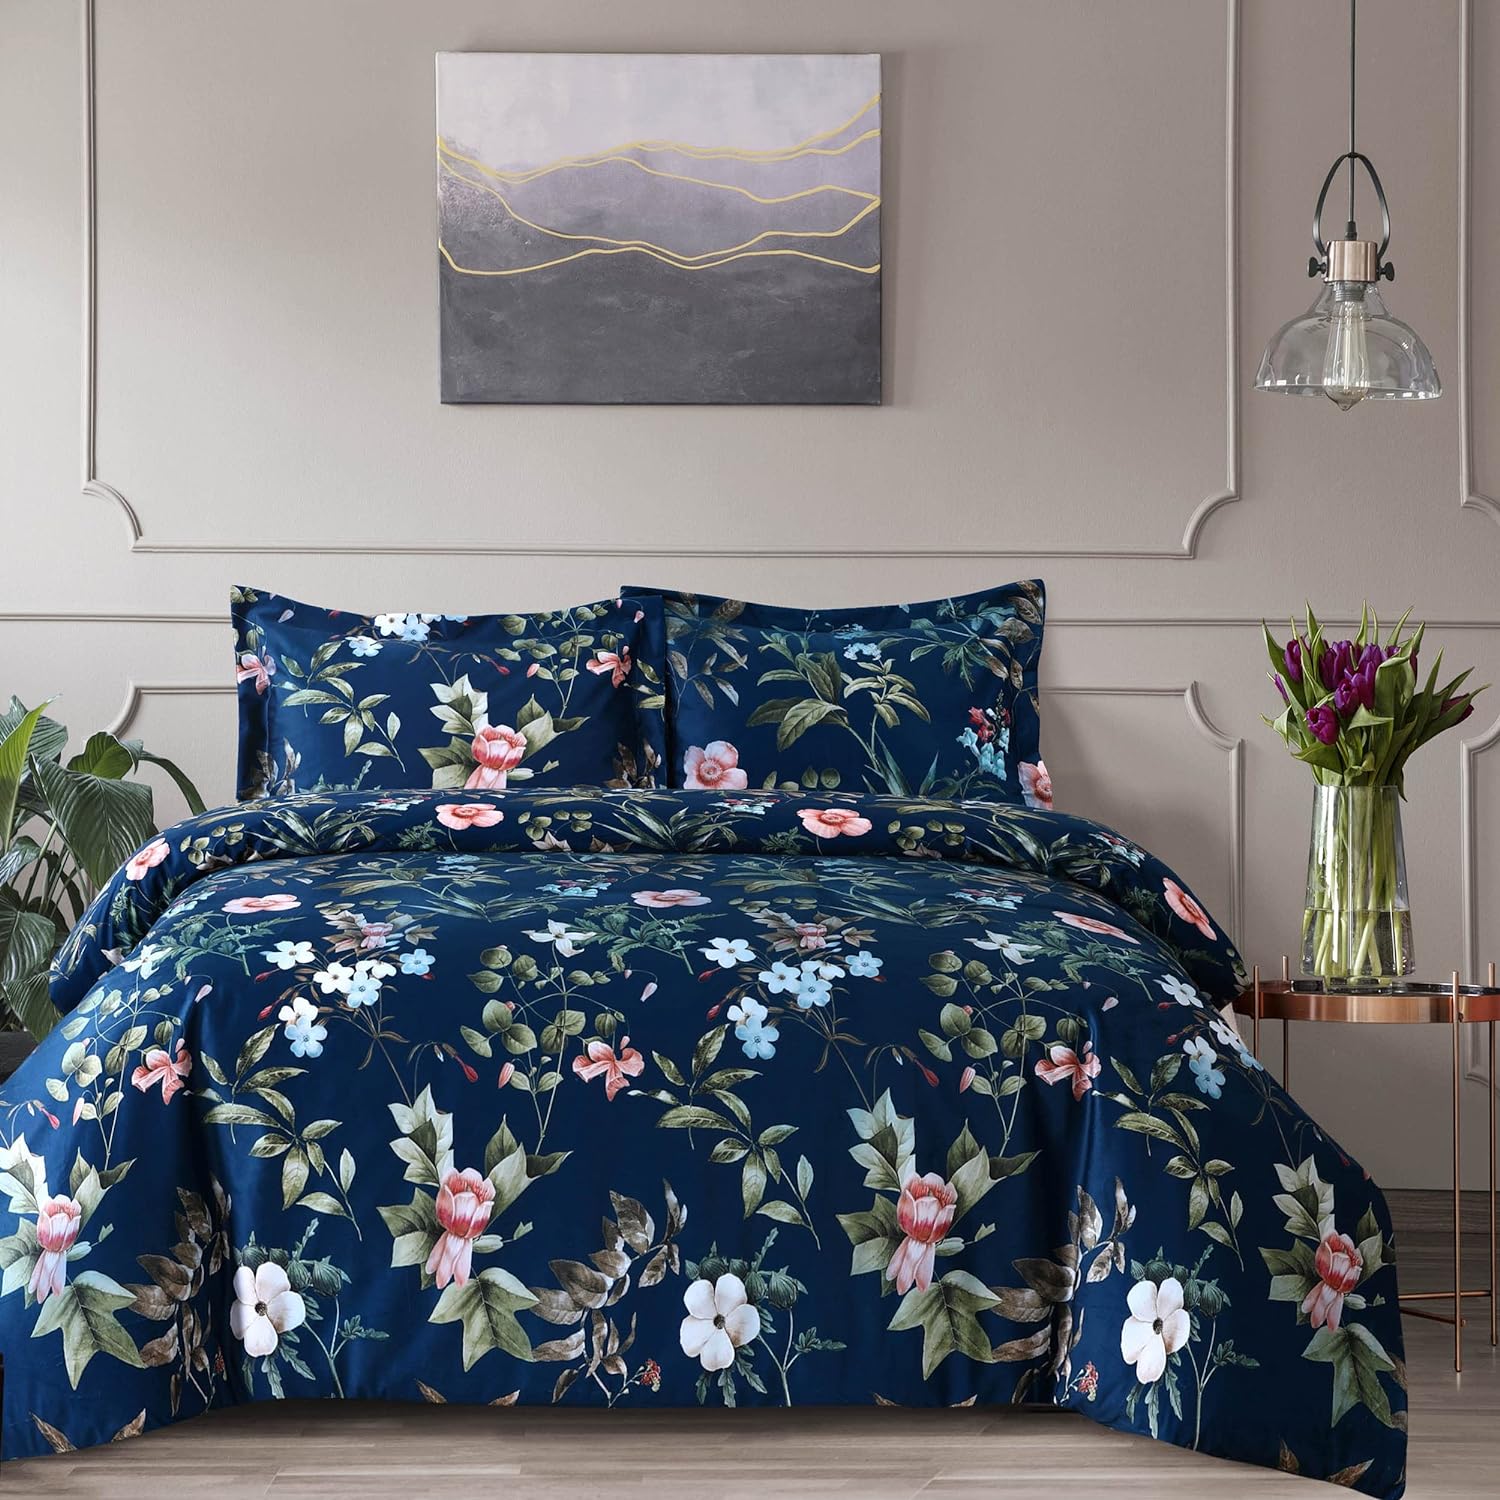 Tribeca Living Velvet Floral Printed King Duvet Cover Set, Soft Touch, Oversized, Luxury Three Piece Set Includes One Duvet Cover and Sham Pillowcases, Calla Multicolor